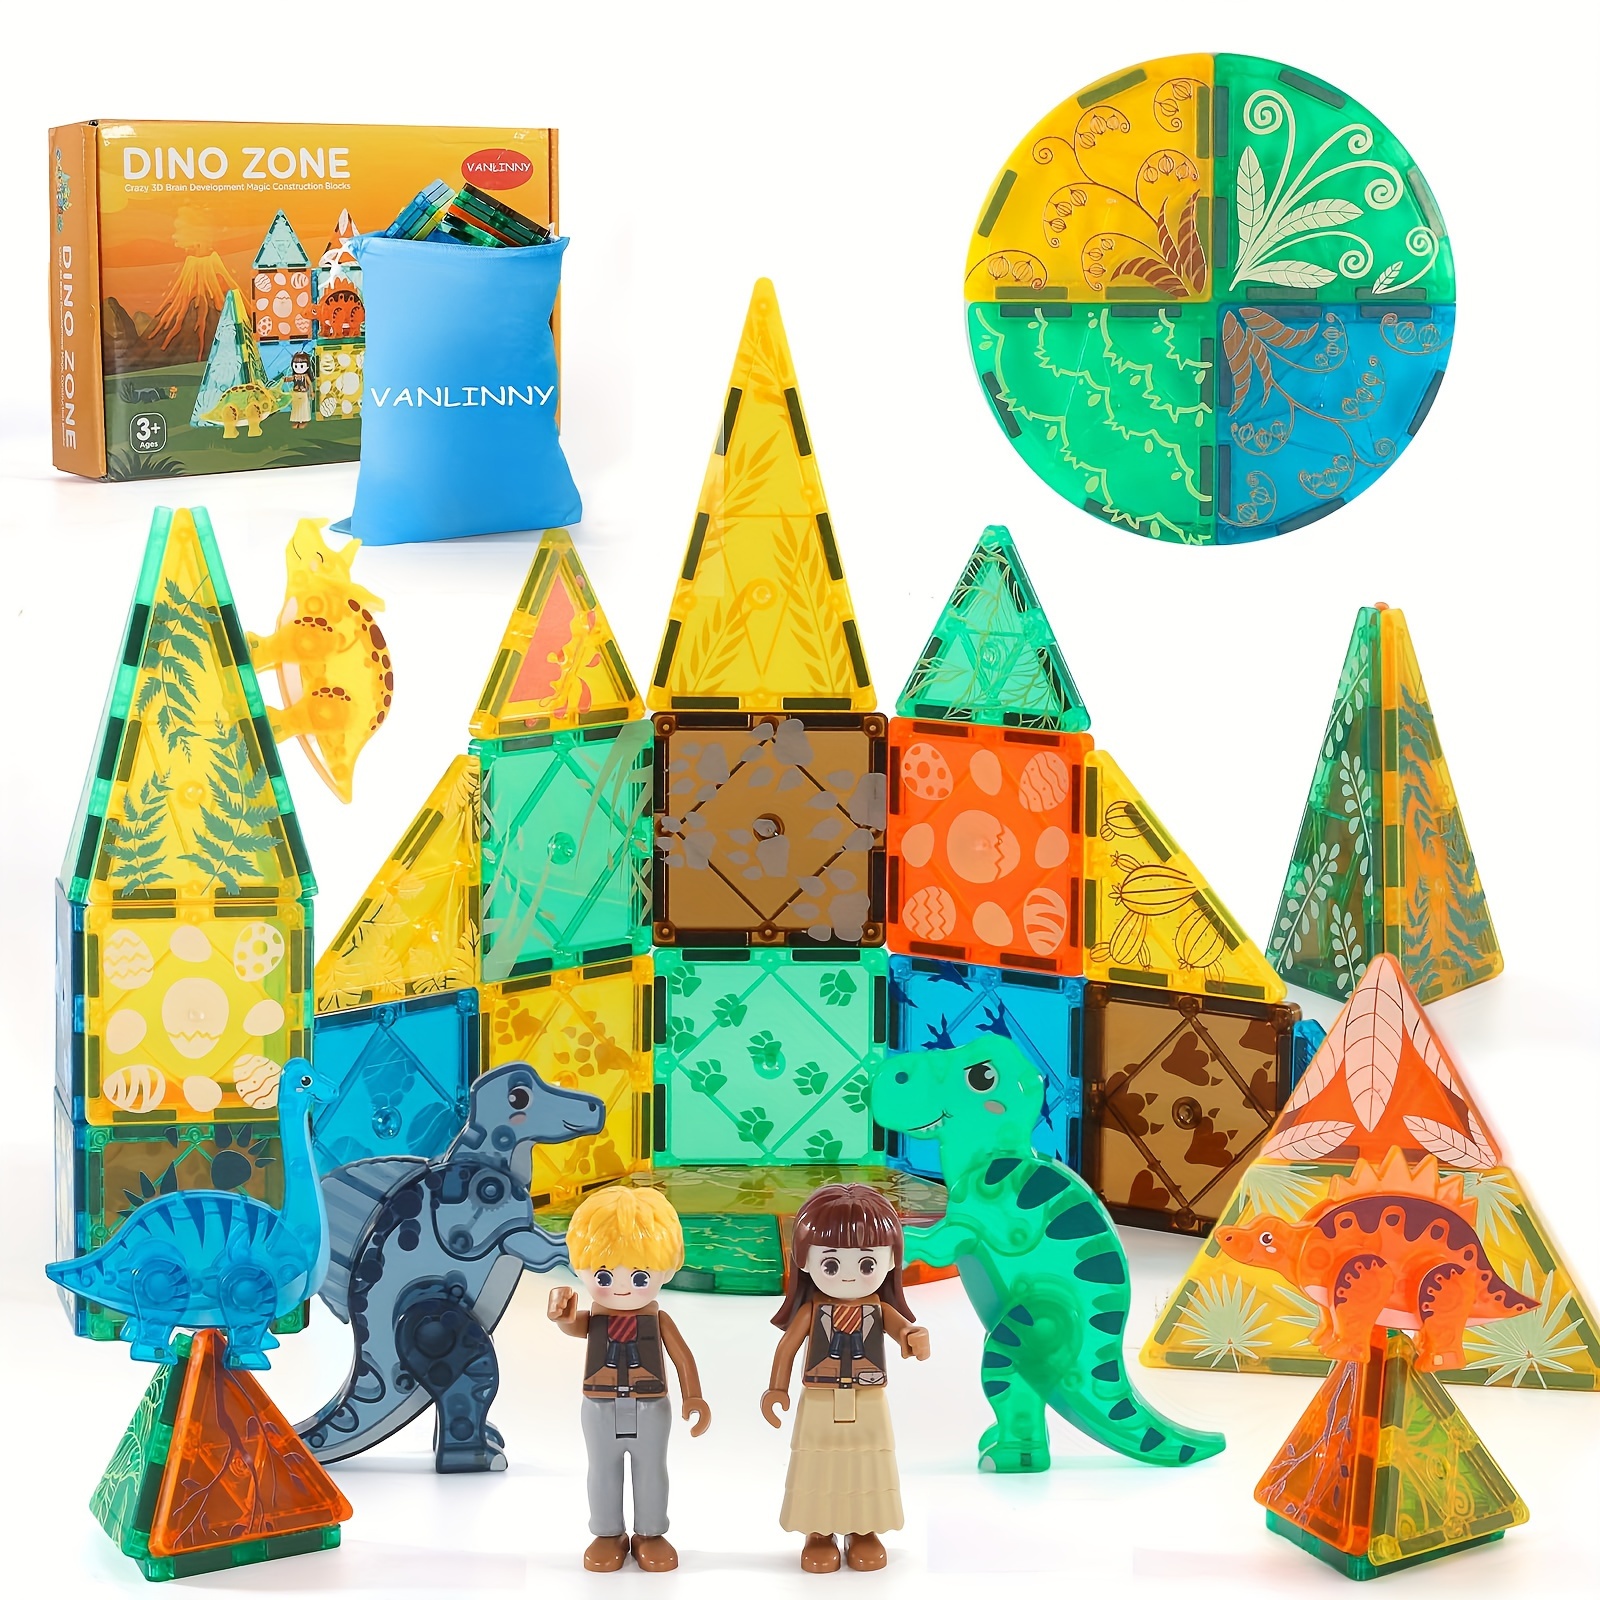 

74-piece Magnetic Tiles, Dinosaur Toys For Kids Ages 3+, Animals Educational Stack Connecting Tile Construction For Boys/girls/toddlers To Improve Imagination/creativity.